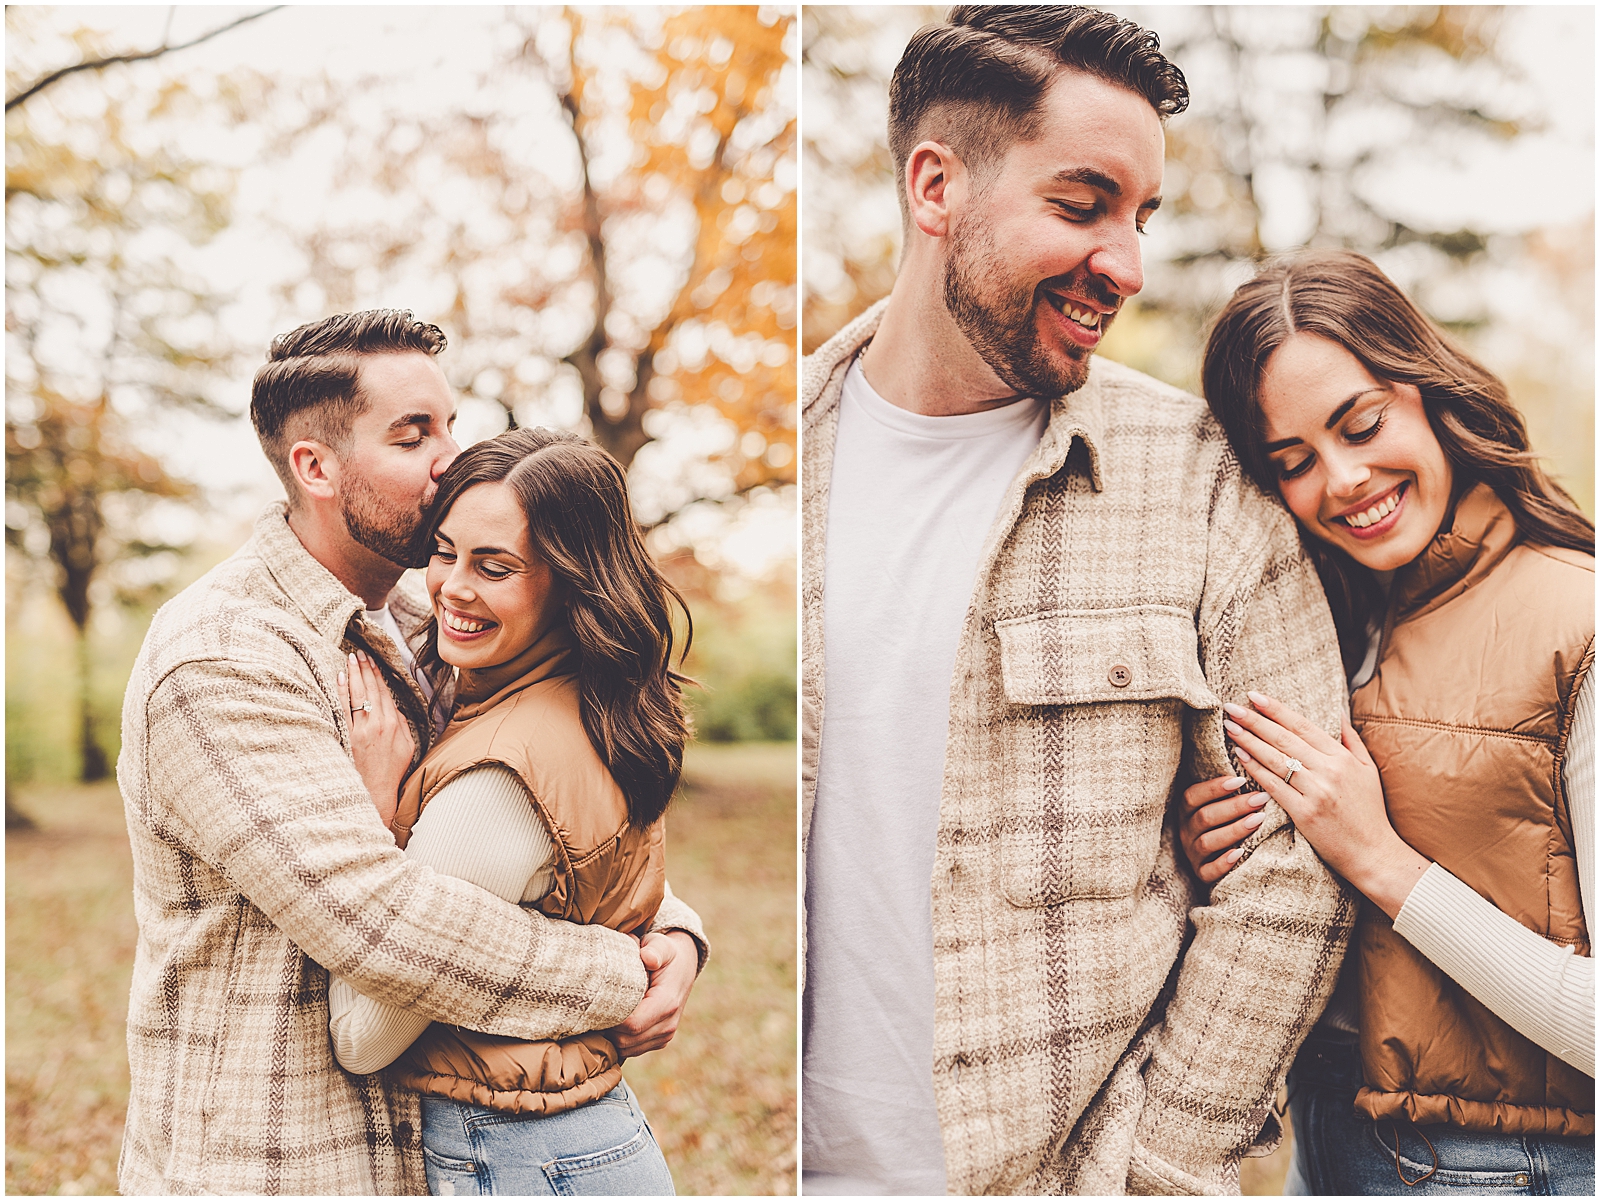 Gillian and Bobby's Kankakee River State Park engagement photos in Bourbonnais with Chicagoland wedding photographer Kara Evans Photographer.